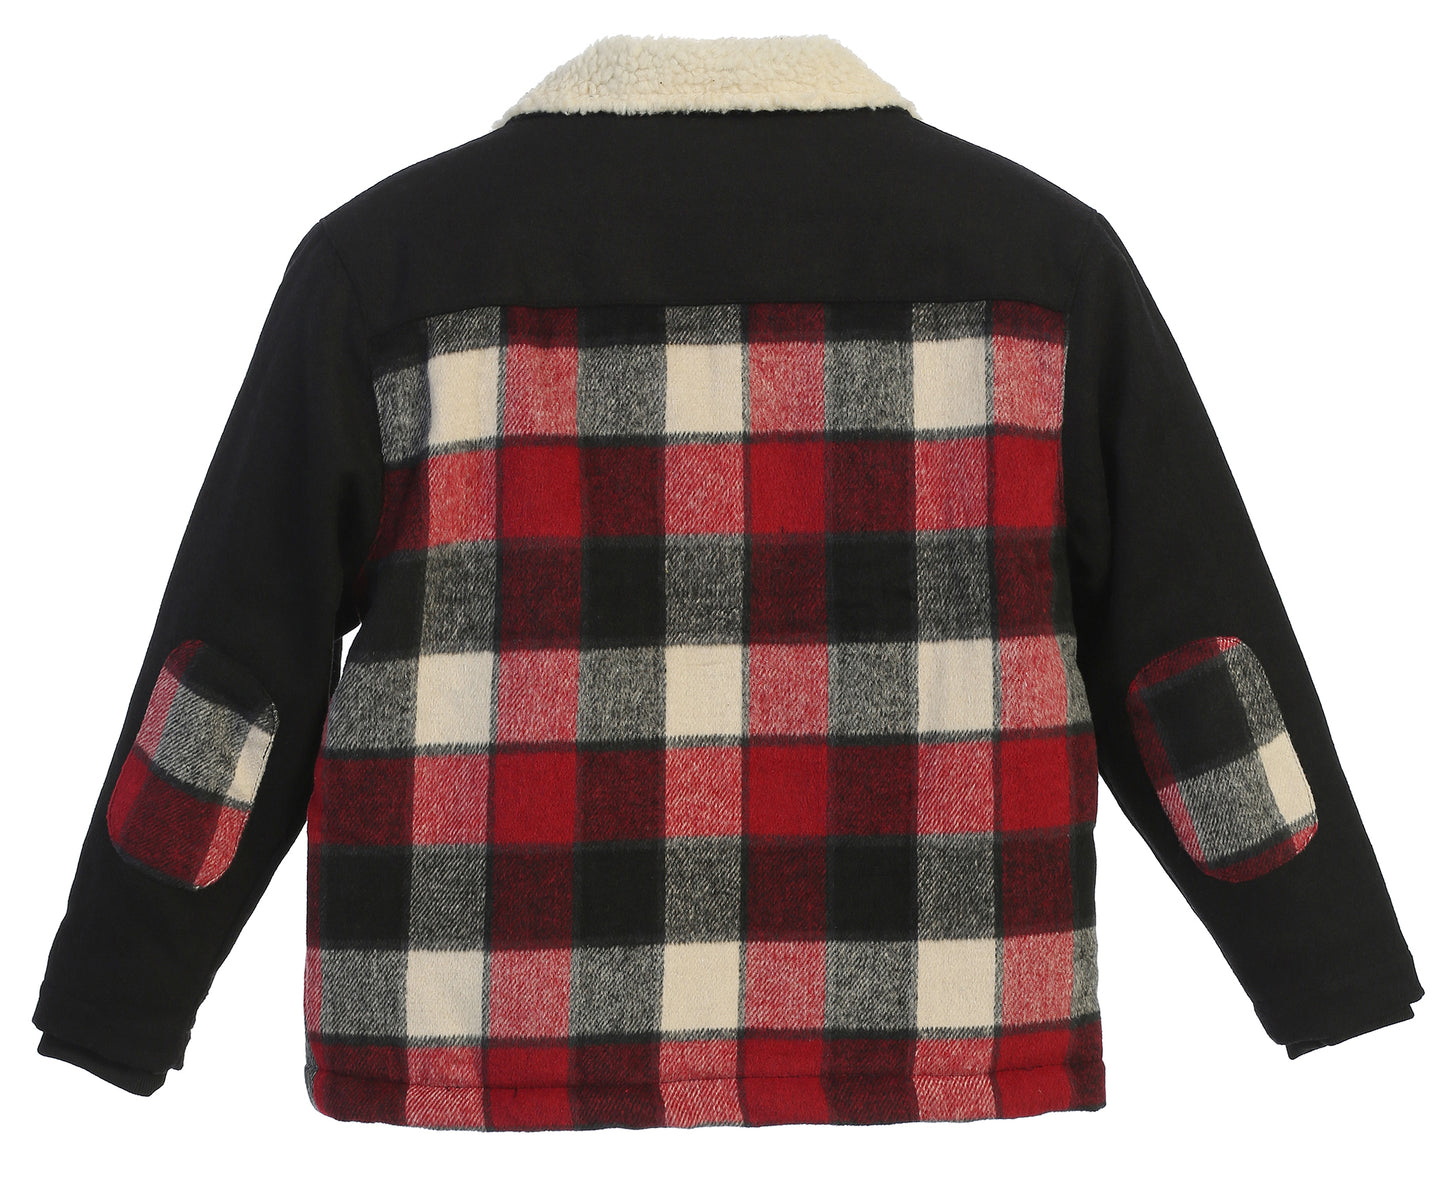 Full Zip Wool-Like Plaid Jacket with Warm Cozy Inner Padding and Sherpa Collar- Red